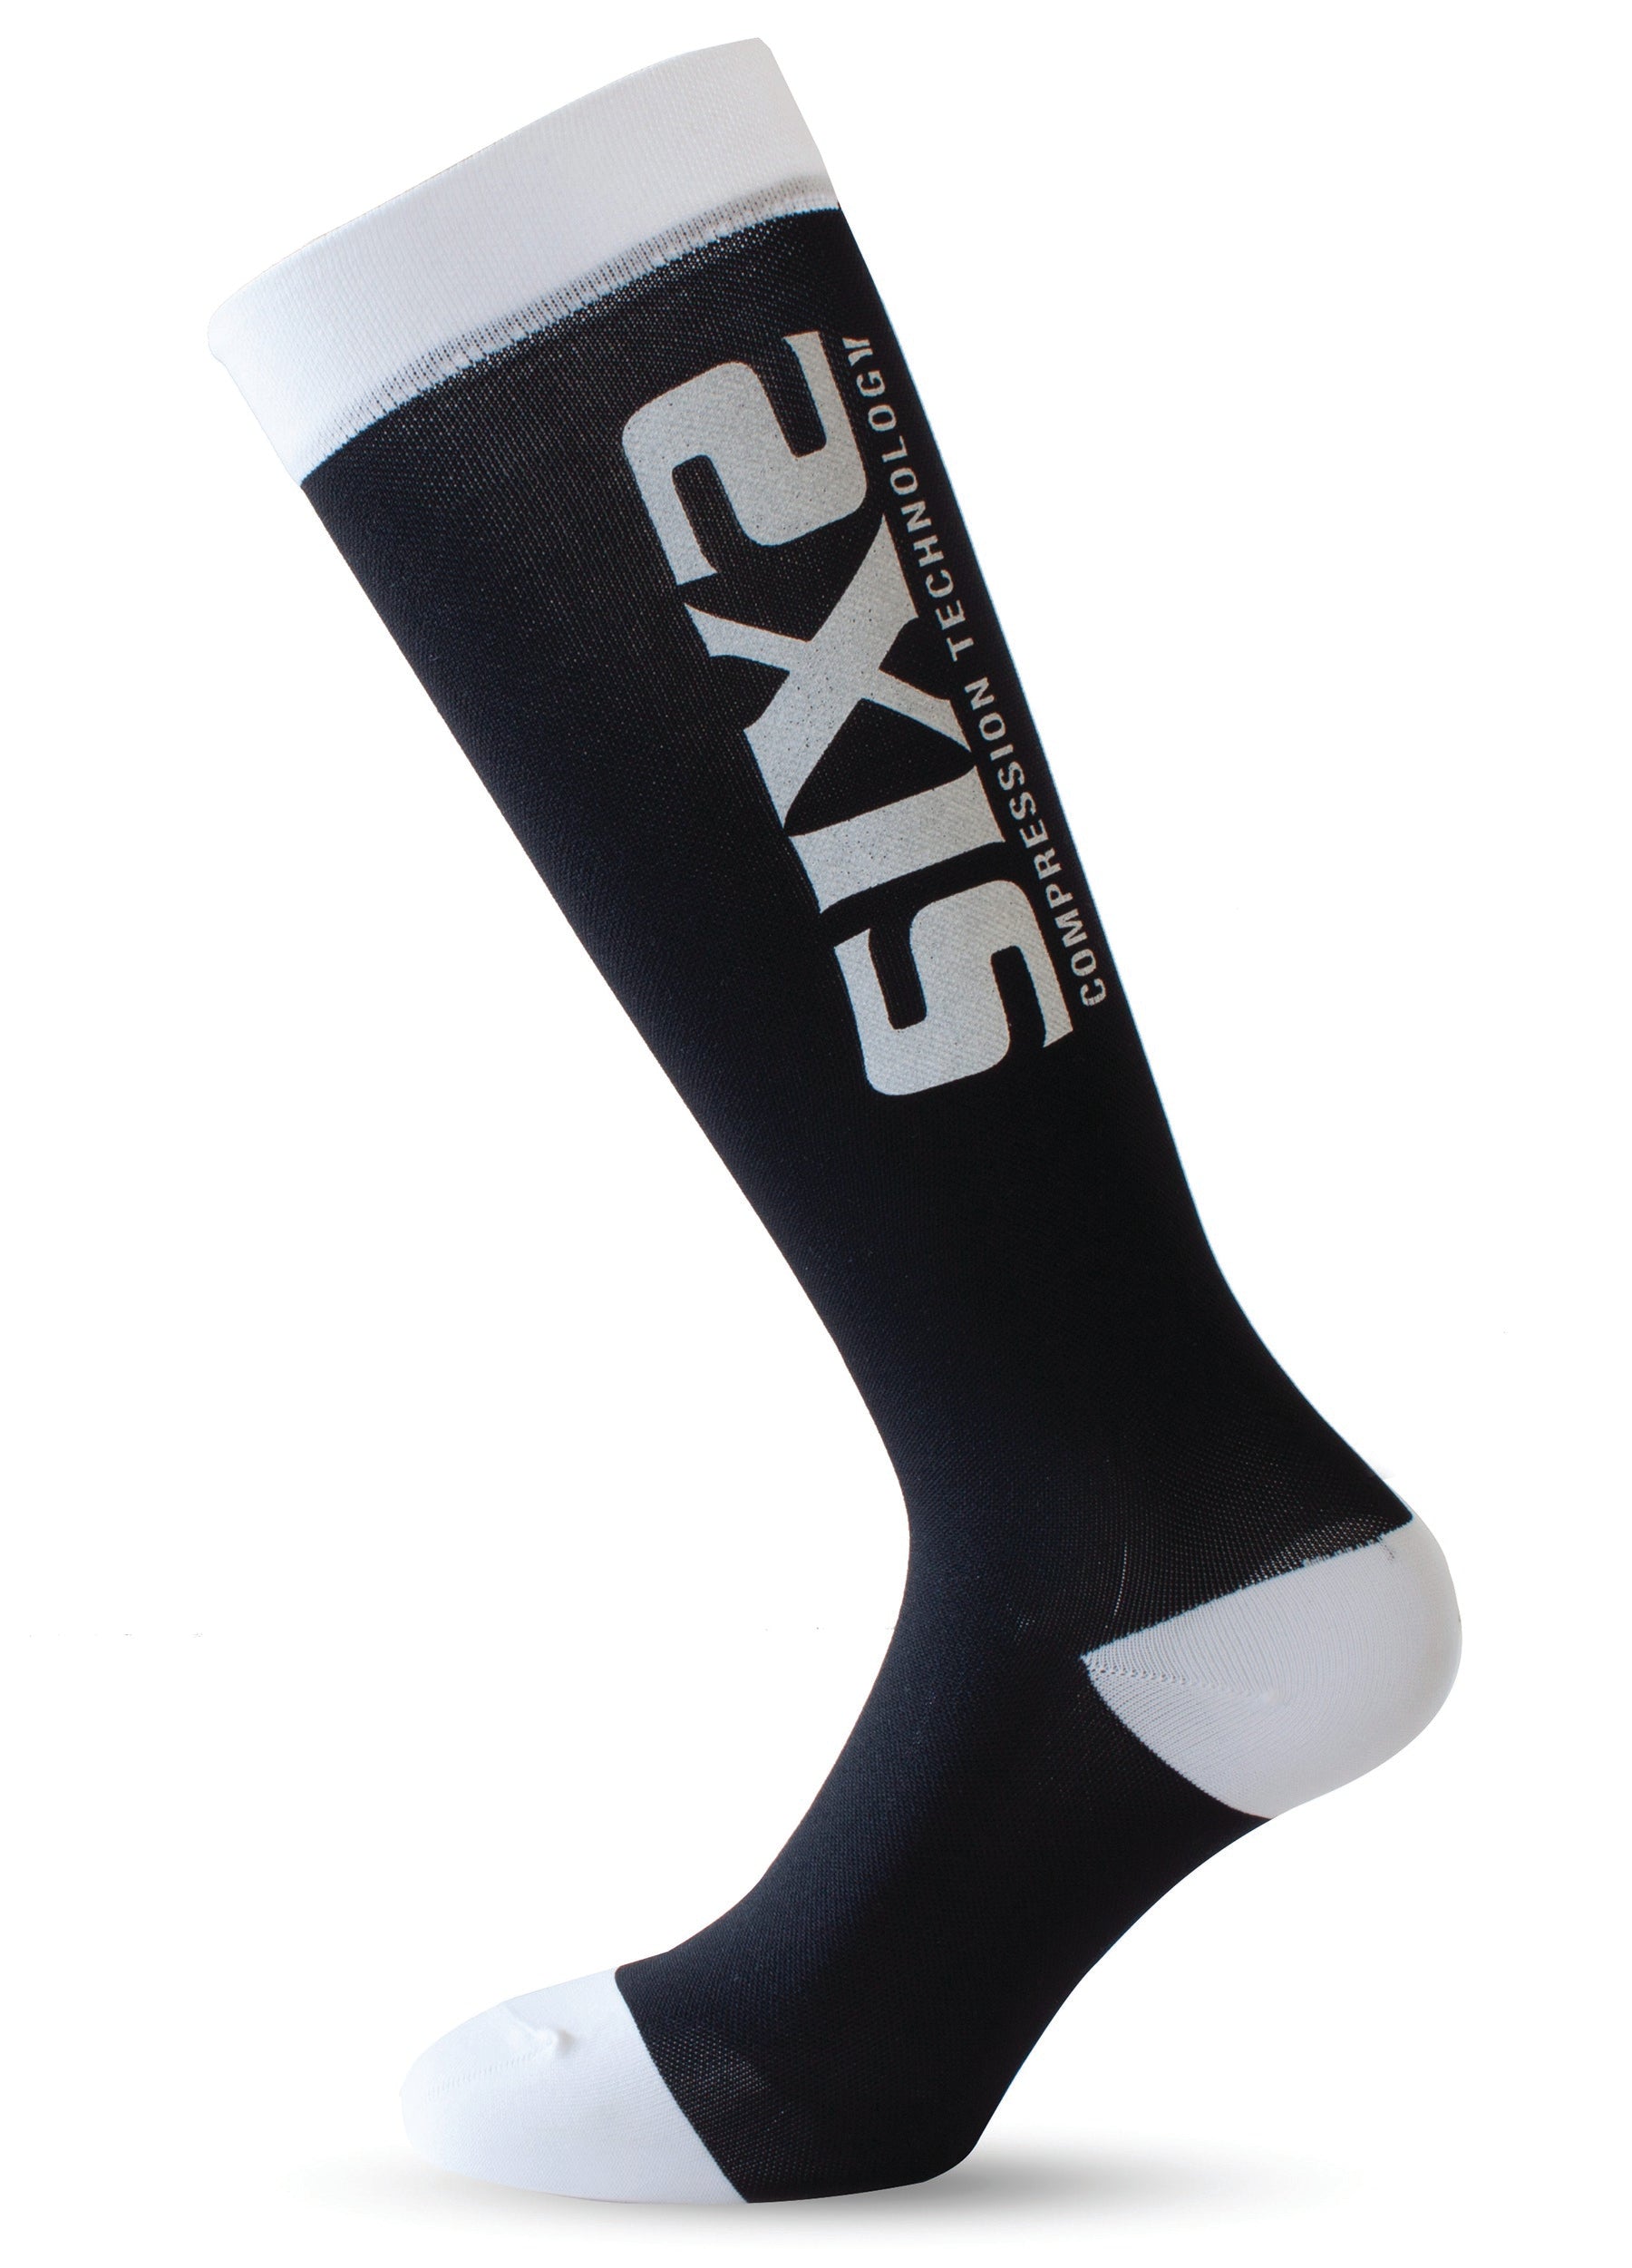 Sixs - Recovery socks